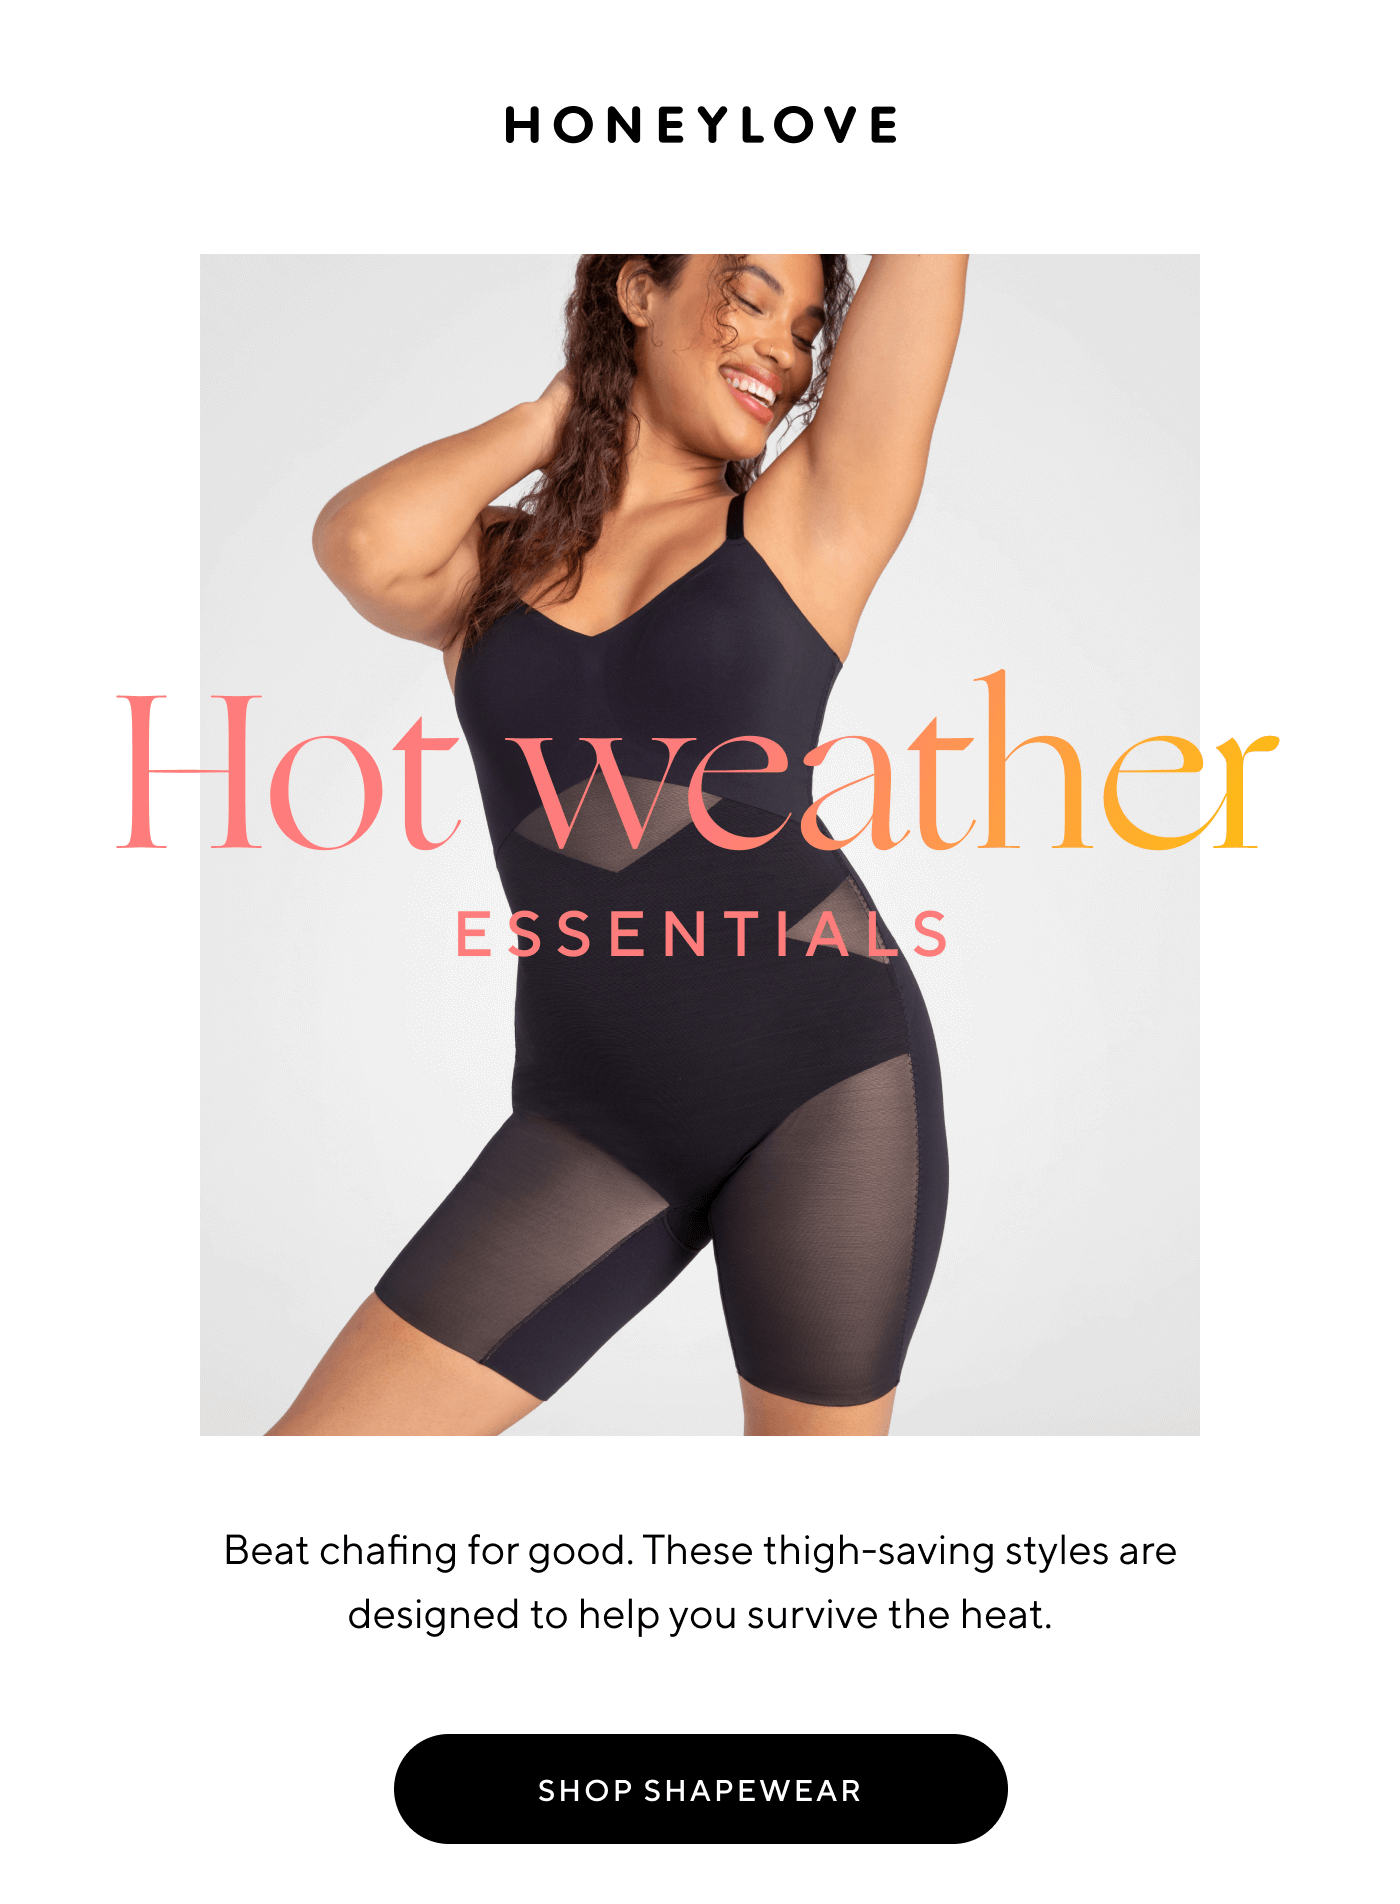 Our top 5 for comfort - Honeylove